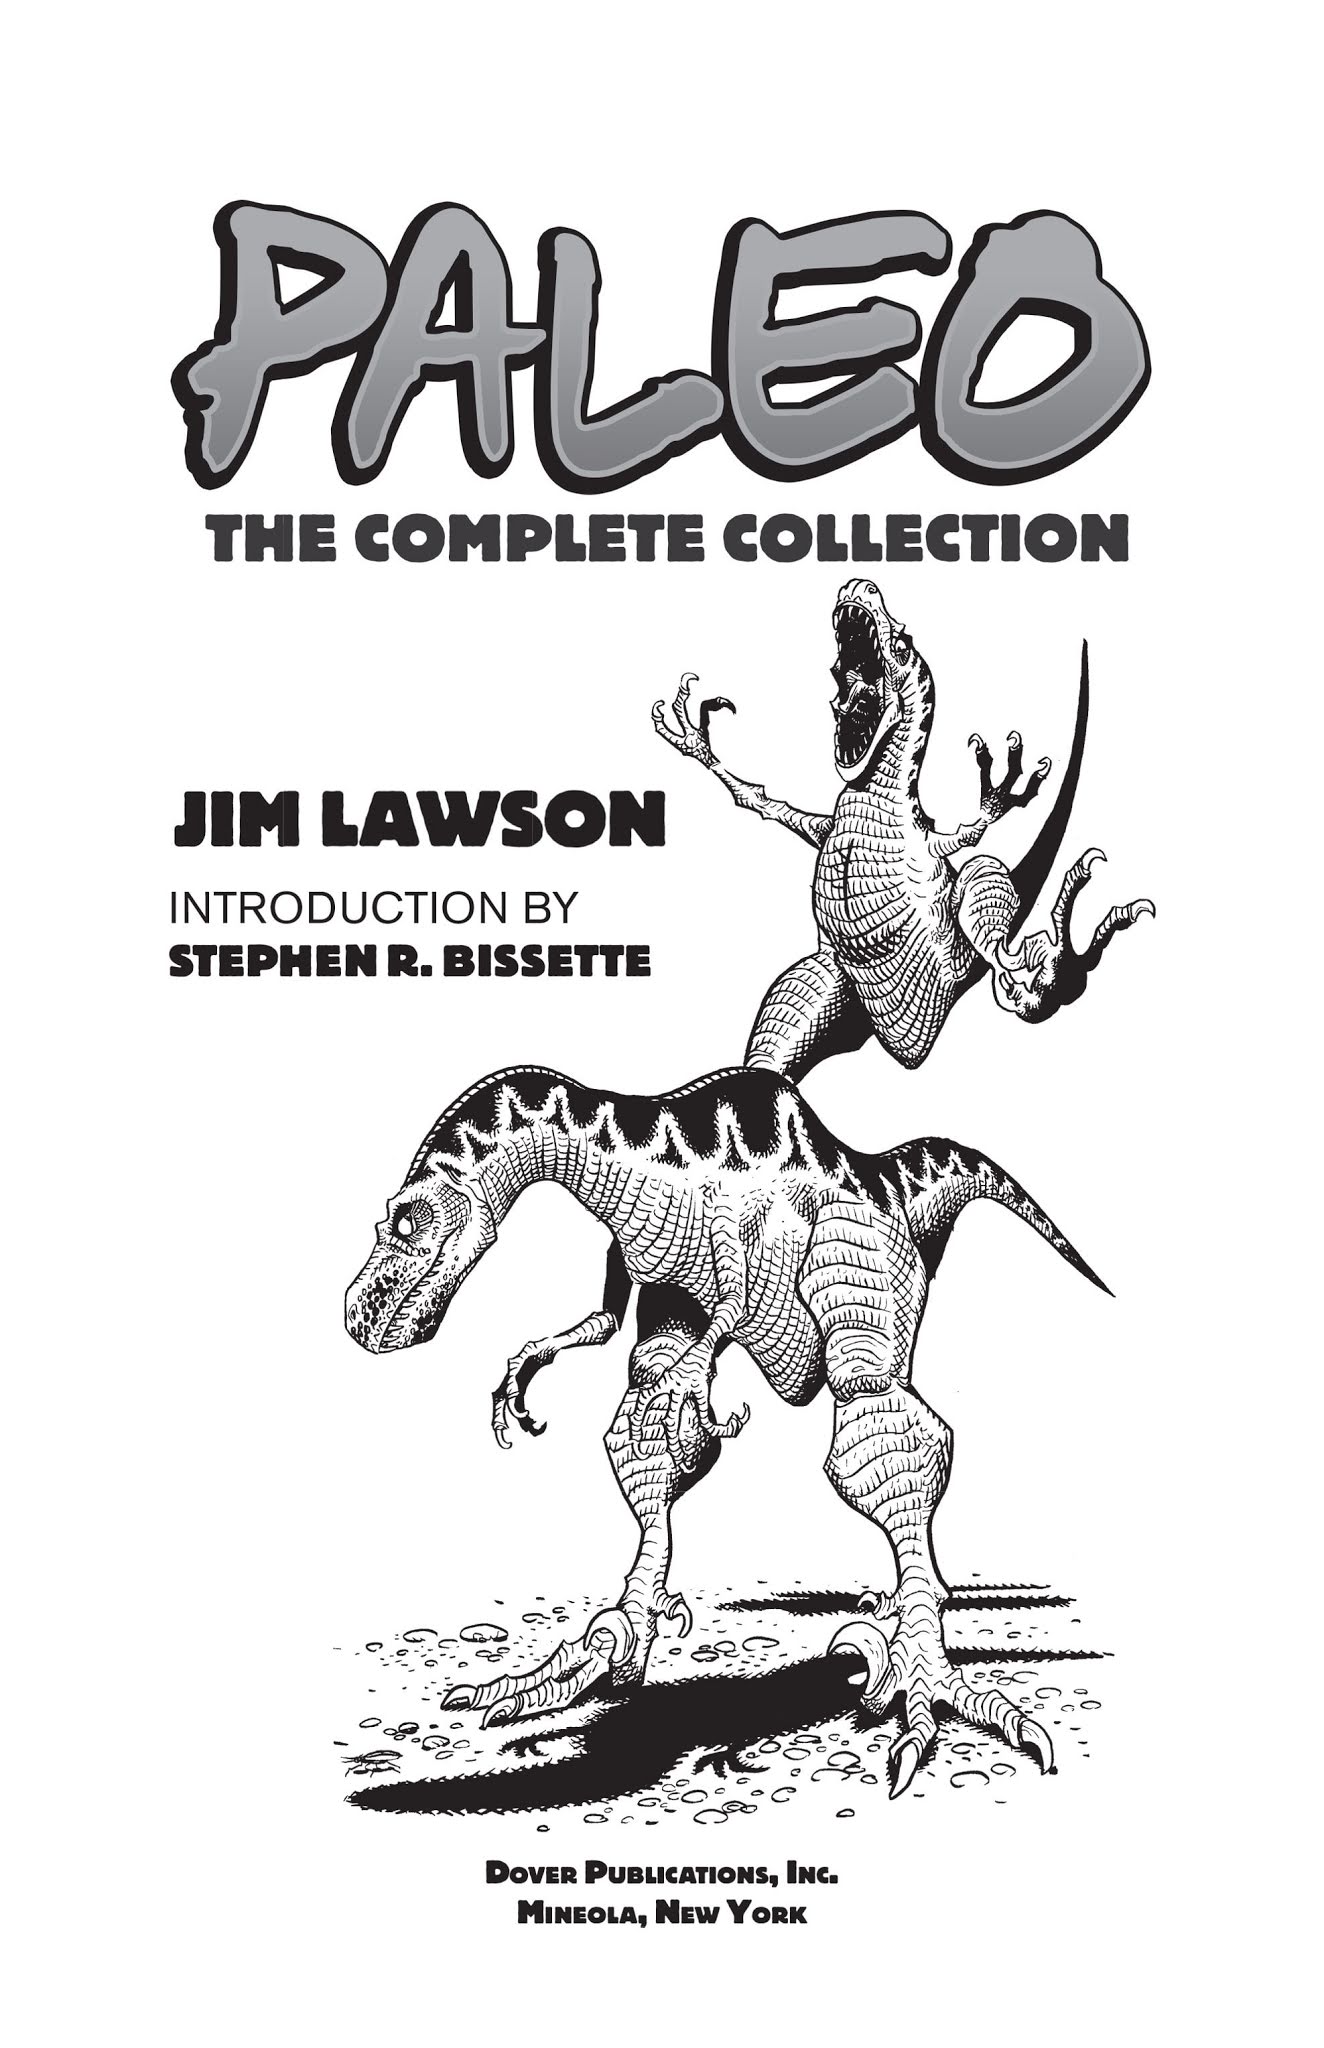 Read online Paleo: Tales of the late Cretaceous comic -  Issue # TPB (Part 1) - 3